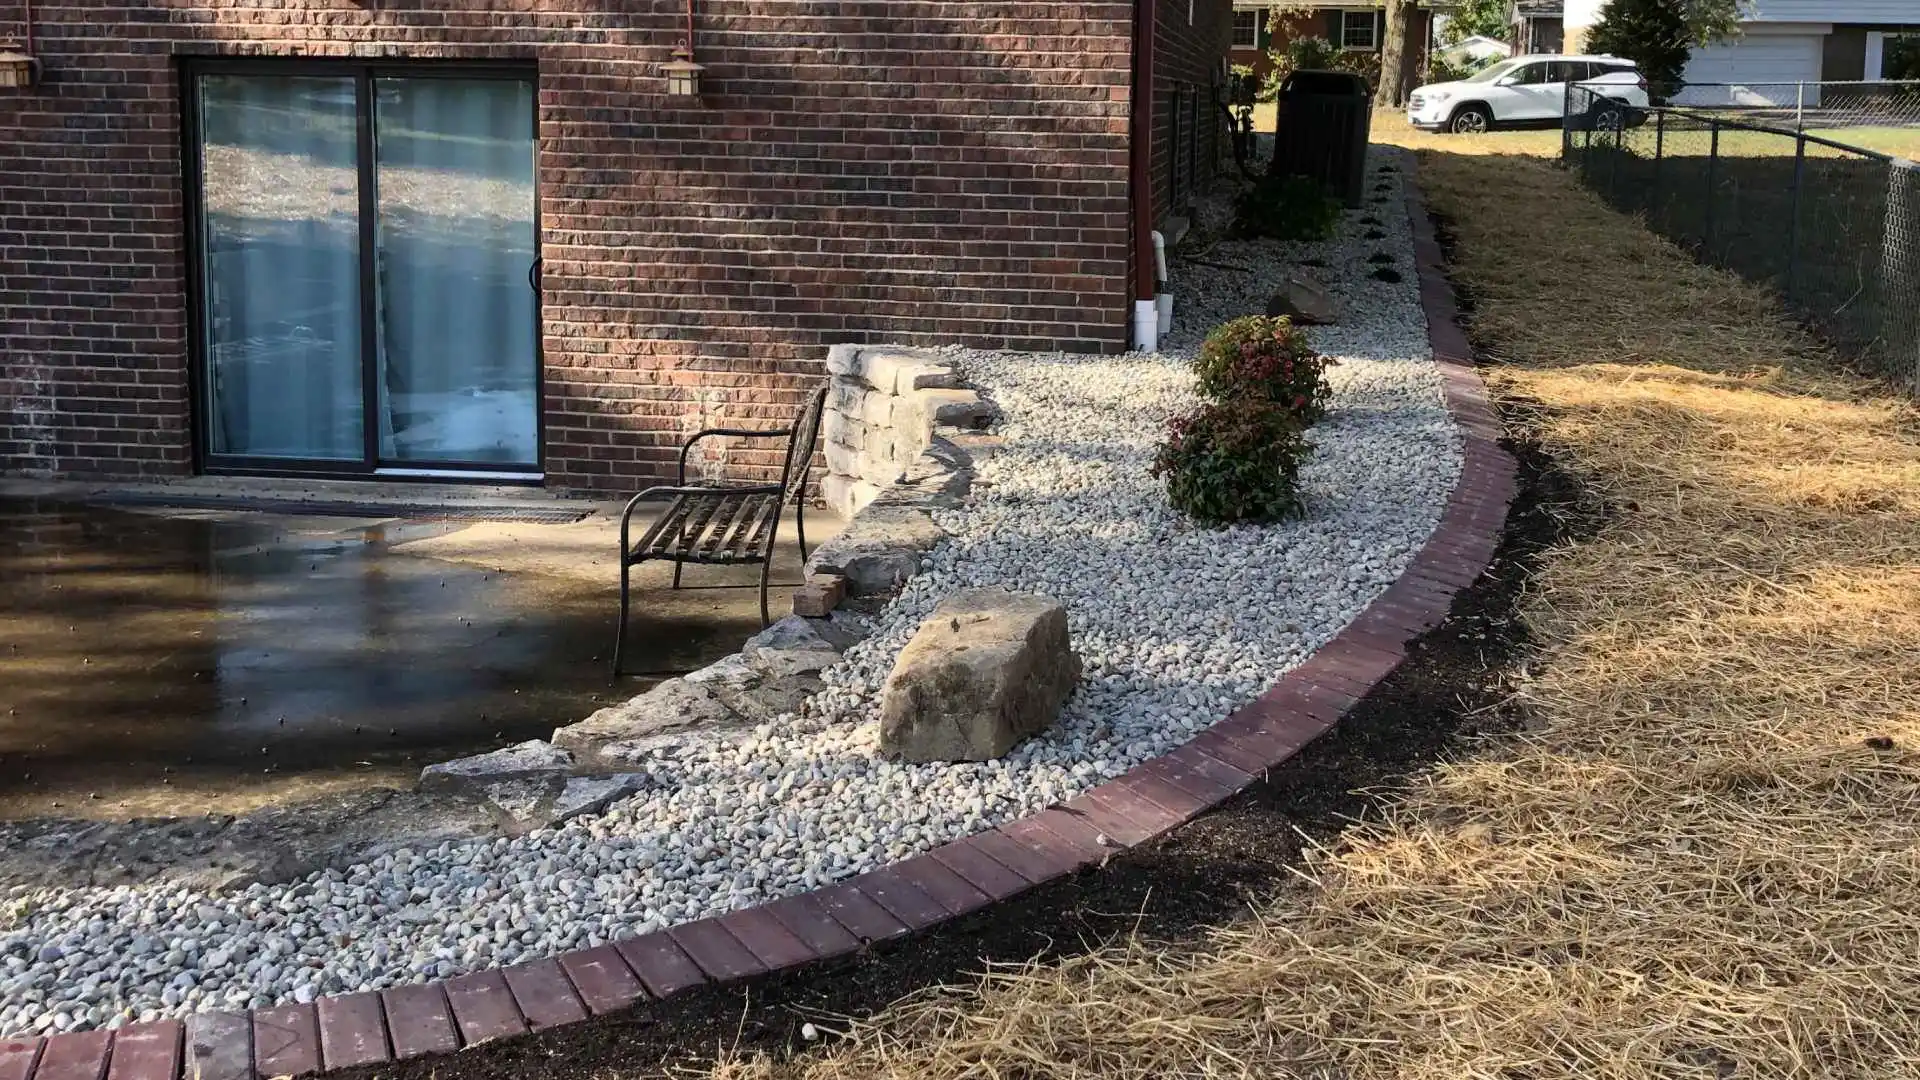 Retaining wall and landscape bed installed for sloped property in Greenville, IL.